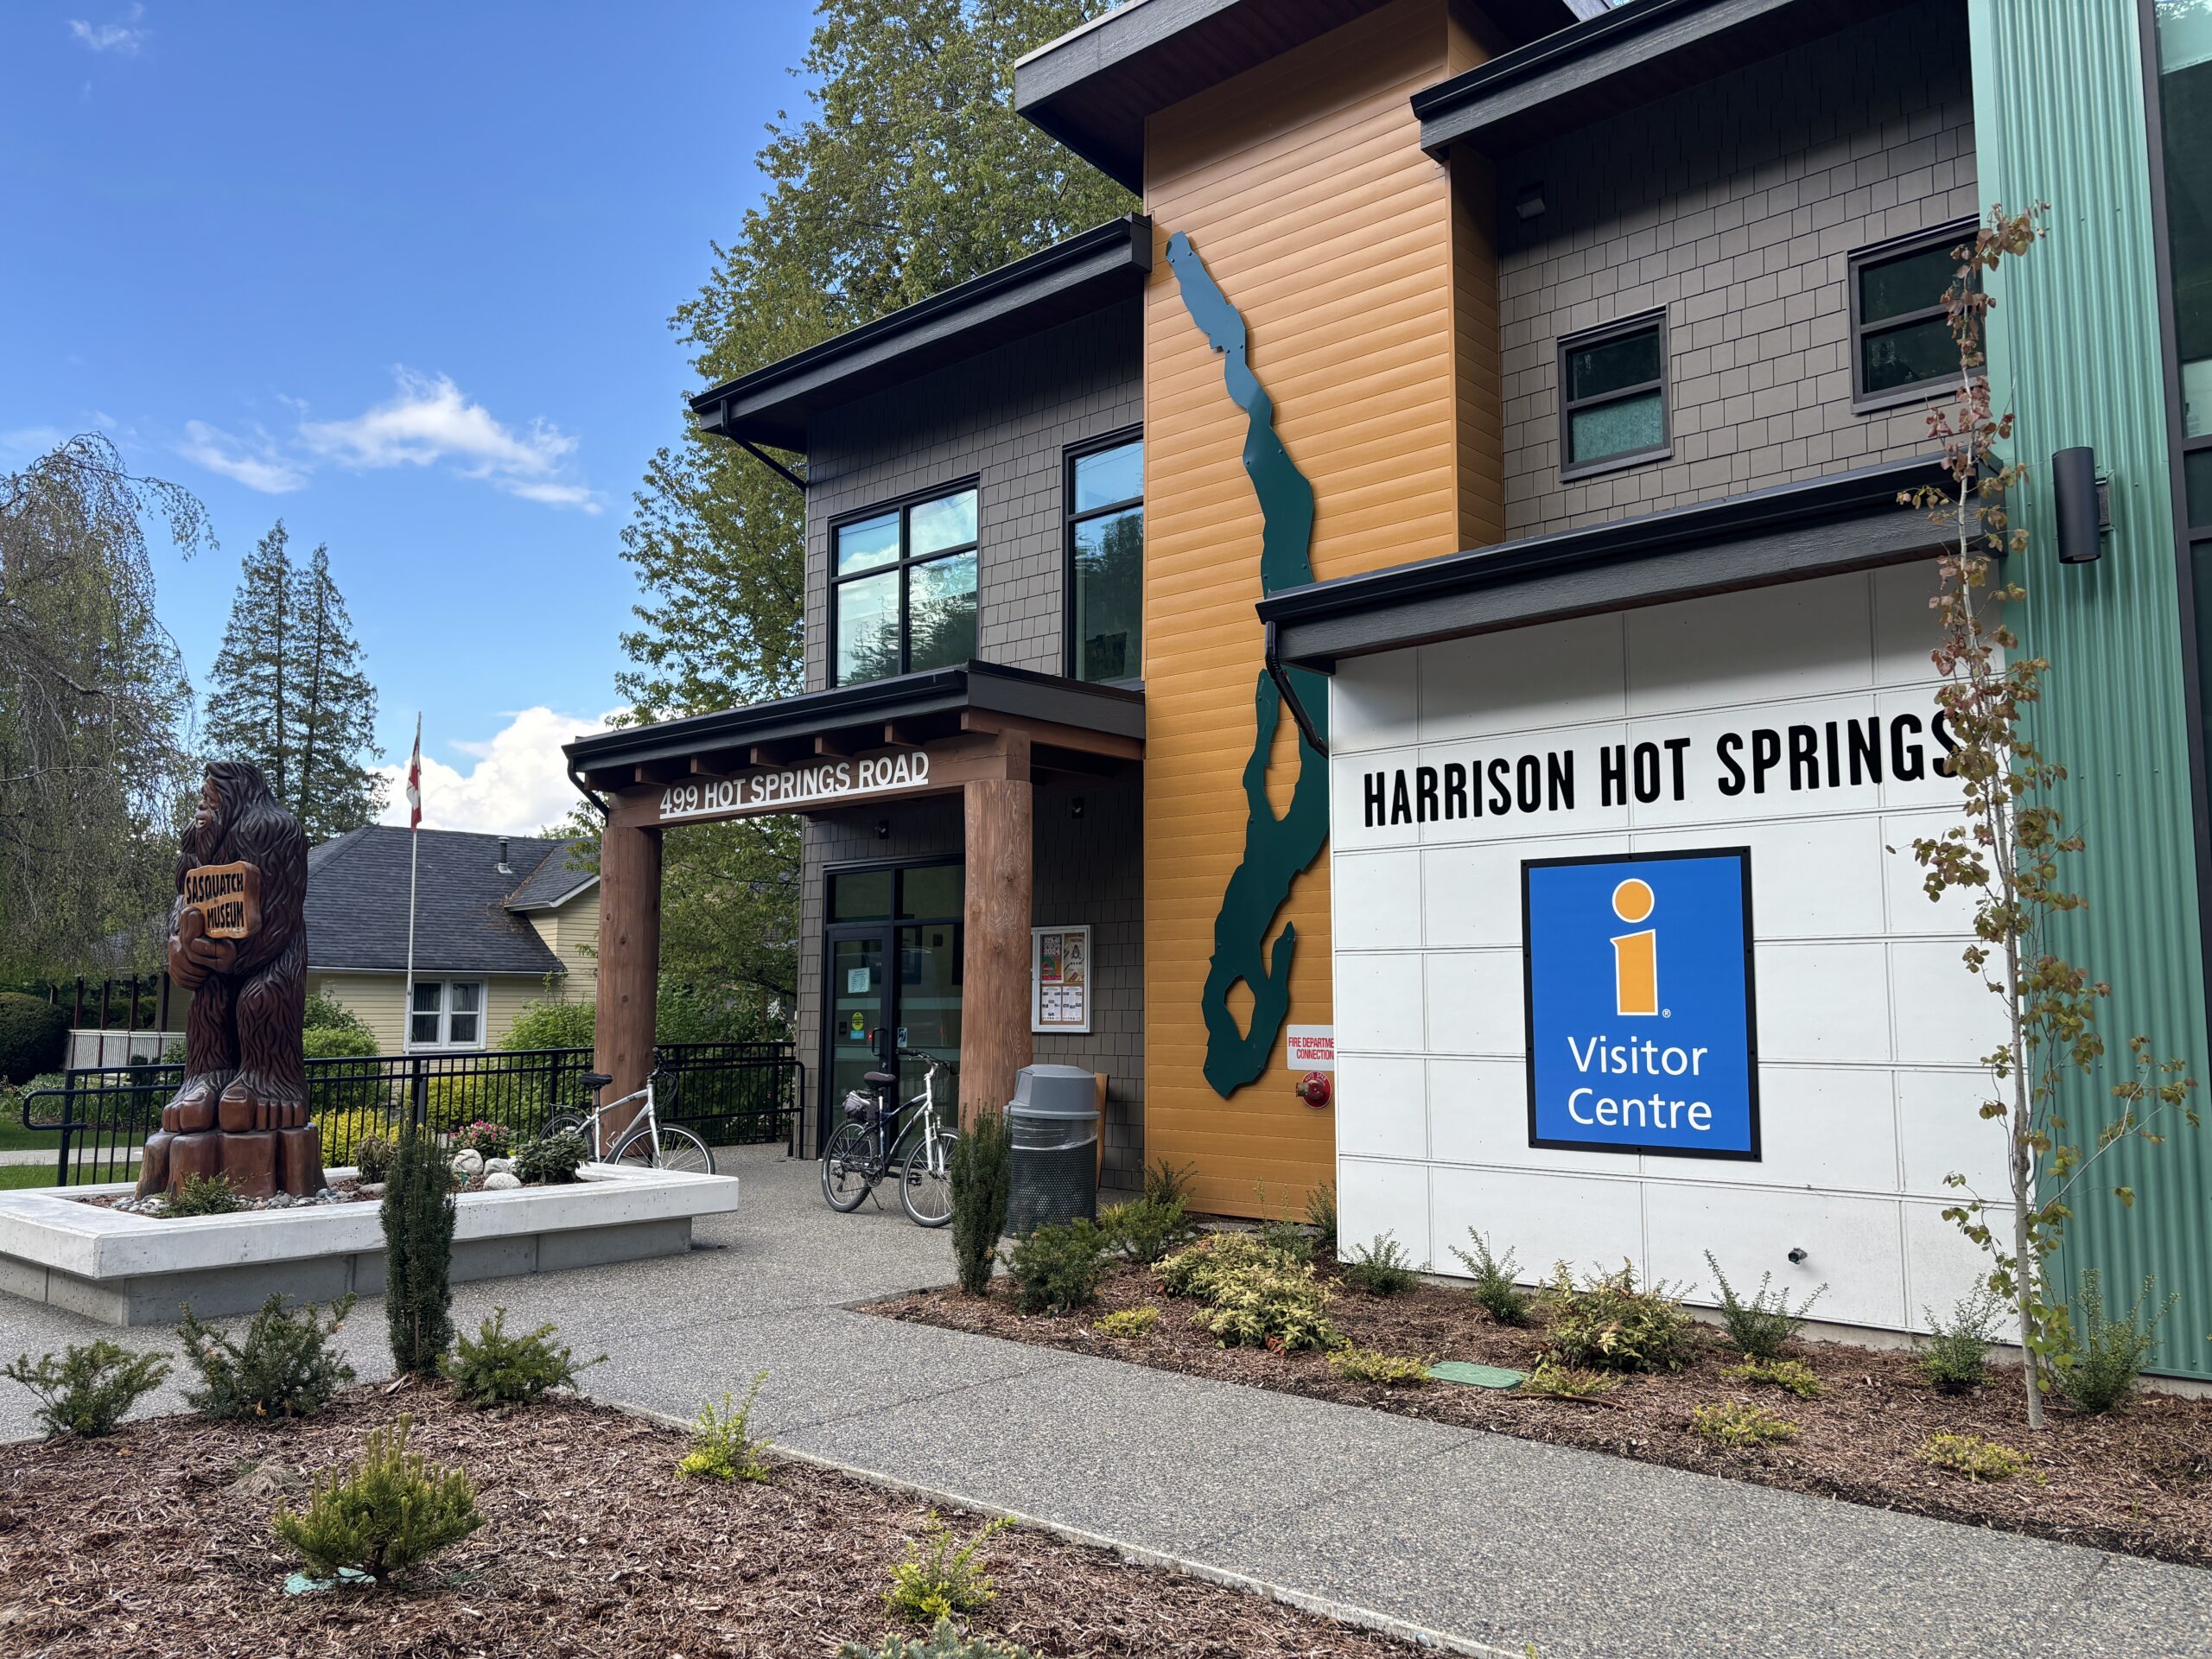 The front of a tourism building, with signage that says "Harrison Hot Springs"